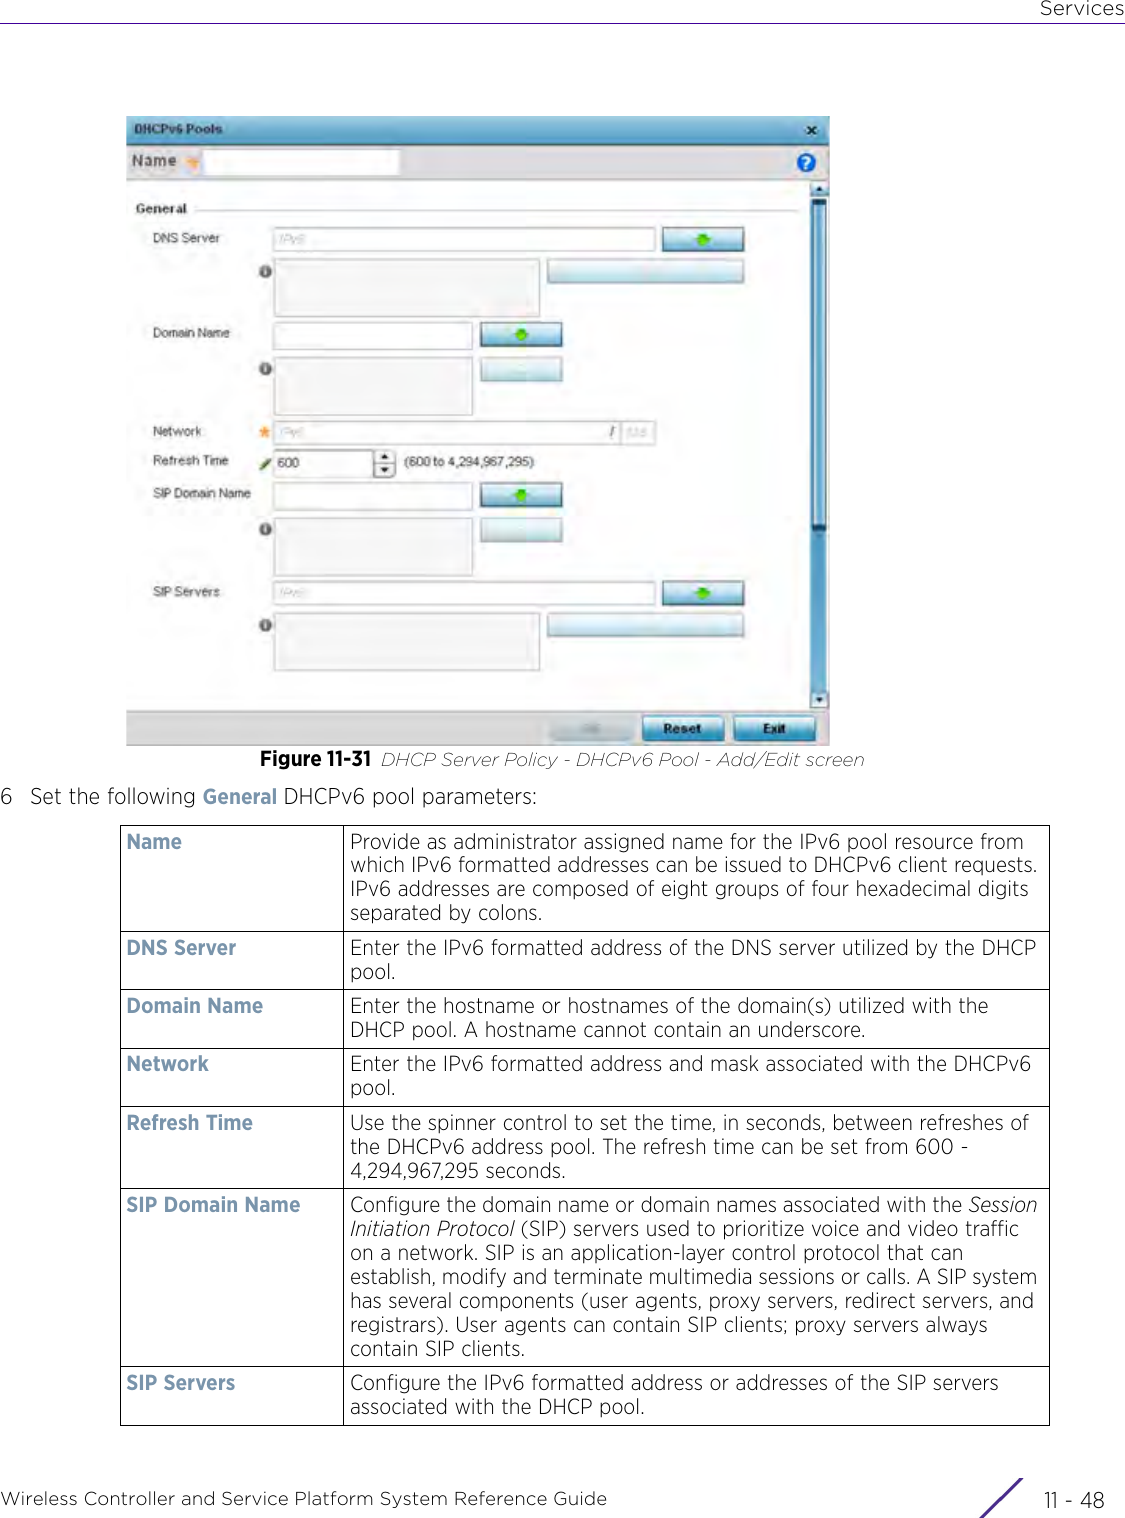 ServicesWireless Controller and Service Platform System Reference Guide  11 - 48Figure 11-31 DHCP Server Policy - DHCPv6 Pool - Add/Edit screen6 Set the following General DHCPv6 pool parameters:Name Provide as administrator assigned name for the IPv6 pool resource from which IPv6 formatted addresses can be issued to DHCPv6 client requests. IPv6 addresses are composed of eight groups of four hexadecimal digits separated by colons.DNS Server Enter the IPv6 formatted address of the DNS server utilized by the DHCP pool.Domain Name Enter the hostname or hostnames of the domain(s) utilized with the DHCP pool. A hostname cannot contain an underscore.Network Enter the IPv6 formatted address and mask associated with the DHCPv6 pool.Refresh Time Use the spinner control to set the time, in seconds, between refreshes of the DHCPv6 address pool. The refresh time can be set from 600 - 4,294,967,295 seconds.SIP Domain Name Configure the domain name or domain names associated with the Session Initiation Protocol (SIP) servers used to prioritize voice and video traffic on a network. SIP is an application-layer control protocol that can establish, modify and terminate multimedia sessions or calls. A SIP system has several components (user agents, proxy servers, redirect servers, and registrars). User agents can contain SIP clients; proxy servers always contain SIP clients.SIP Servers Configure the IPv6 formatted address or addresses of the SIP servers associated with the DHCP pool. 